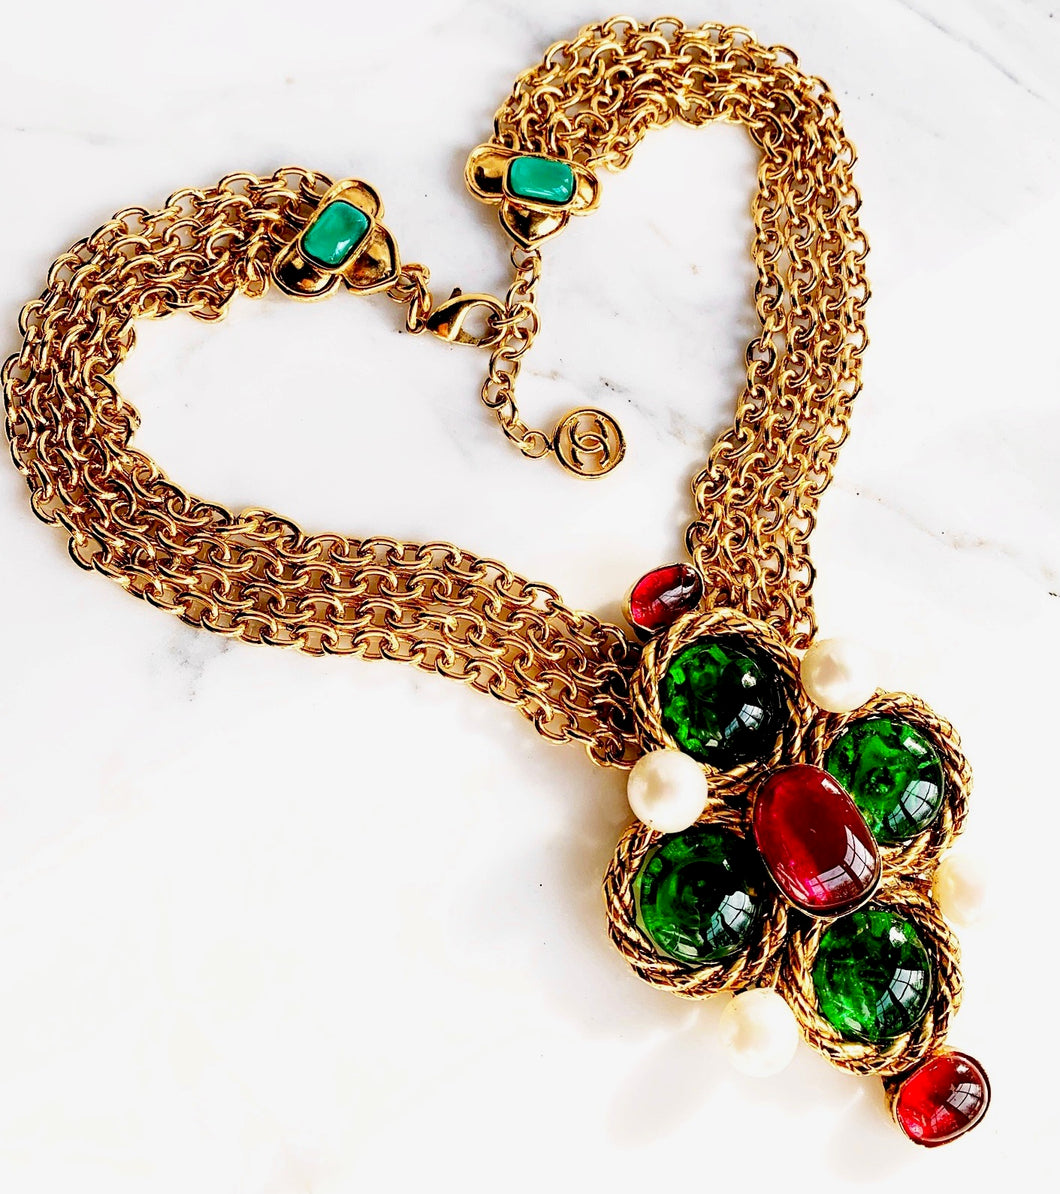 CHANEL MASSIVE EMERALD AND BERRY GRIPOIX POURED GLASS NECKLACE